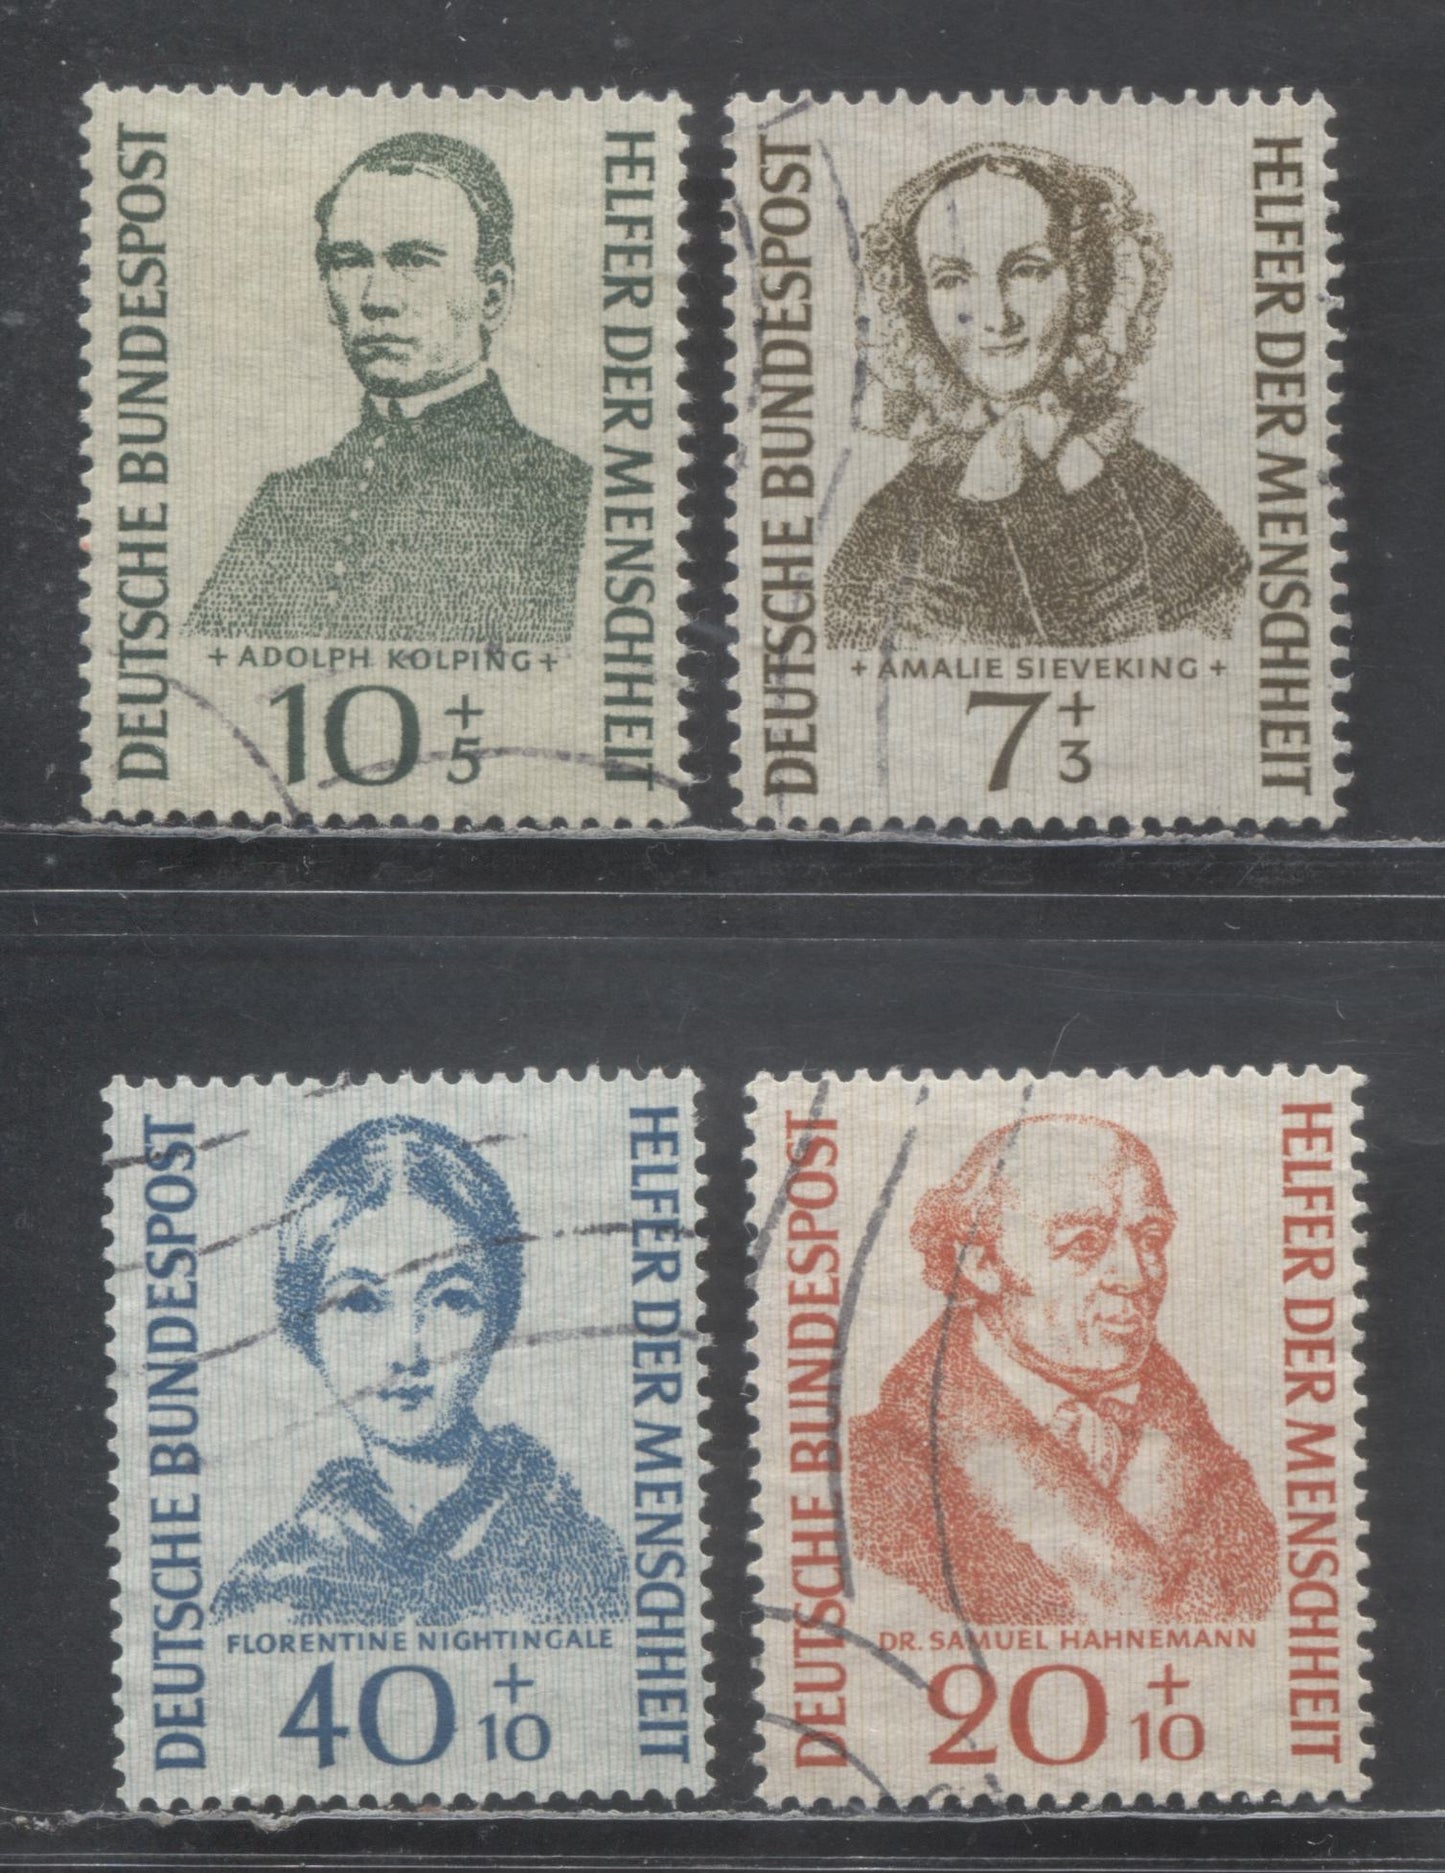 Lot 36 Germany SC#B344-B347 1955 Portrait Semi Postals, 4 Very Fine Used Singles, Click on Listing to See ALL Pictures, Estimated Value $25